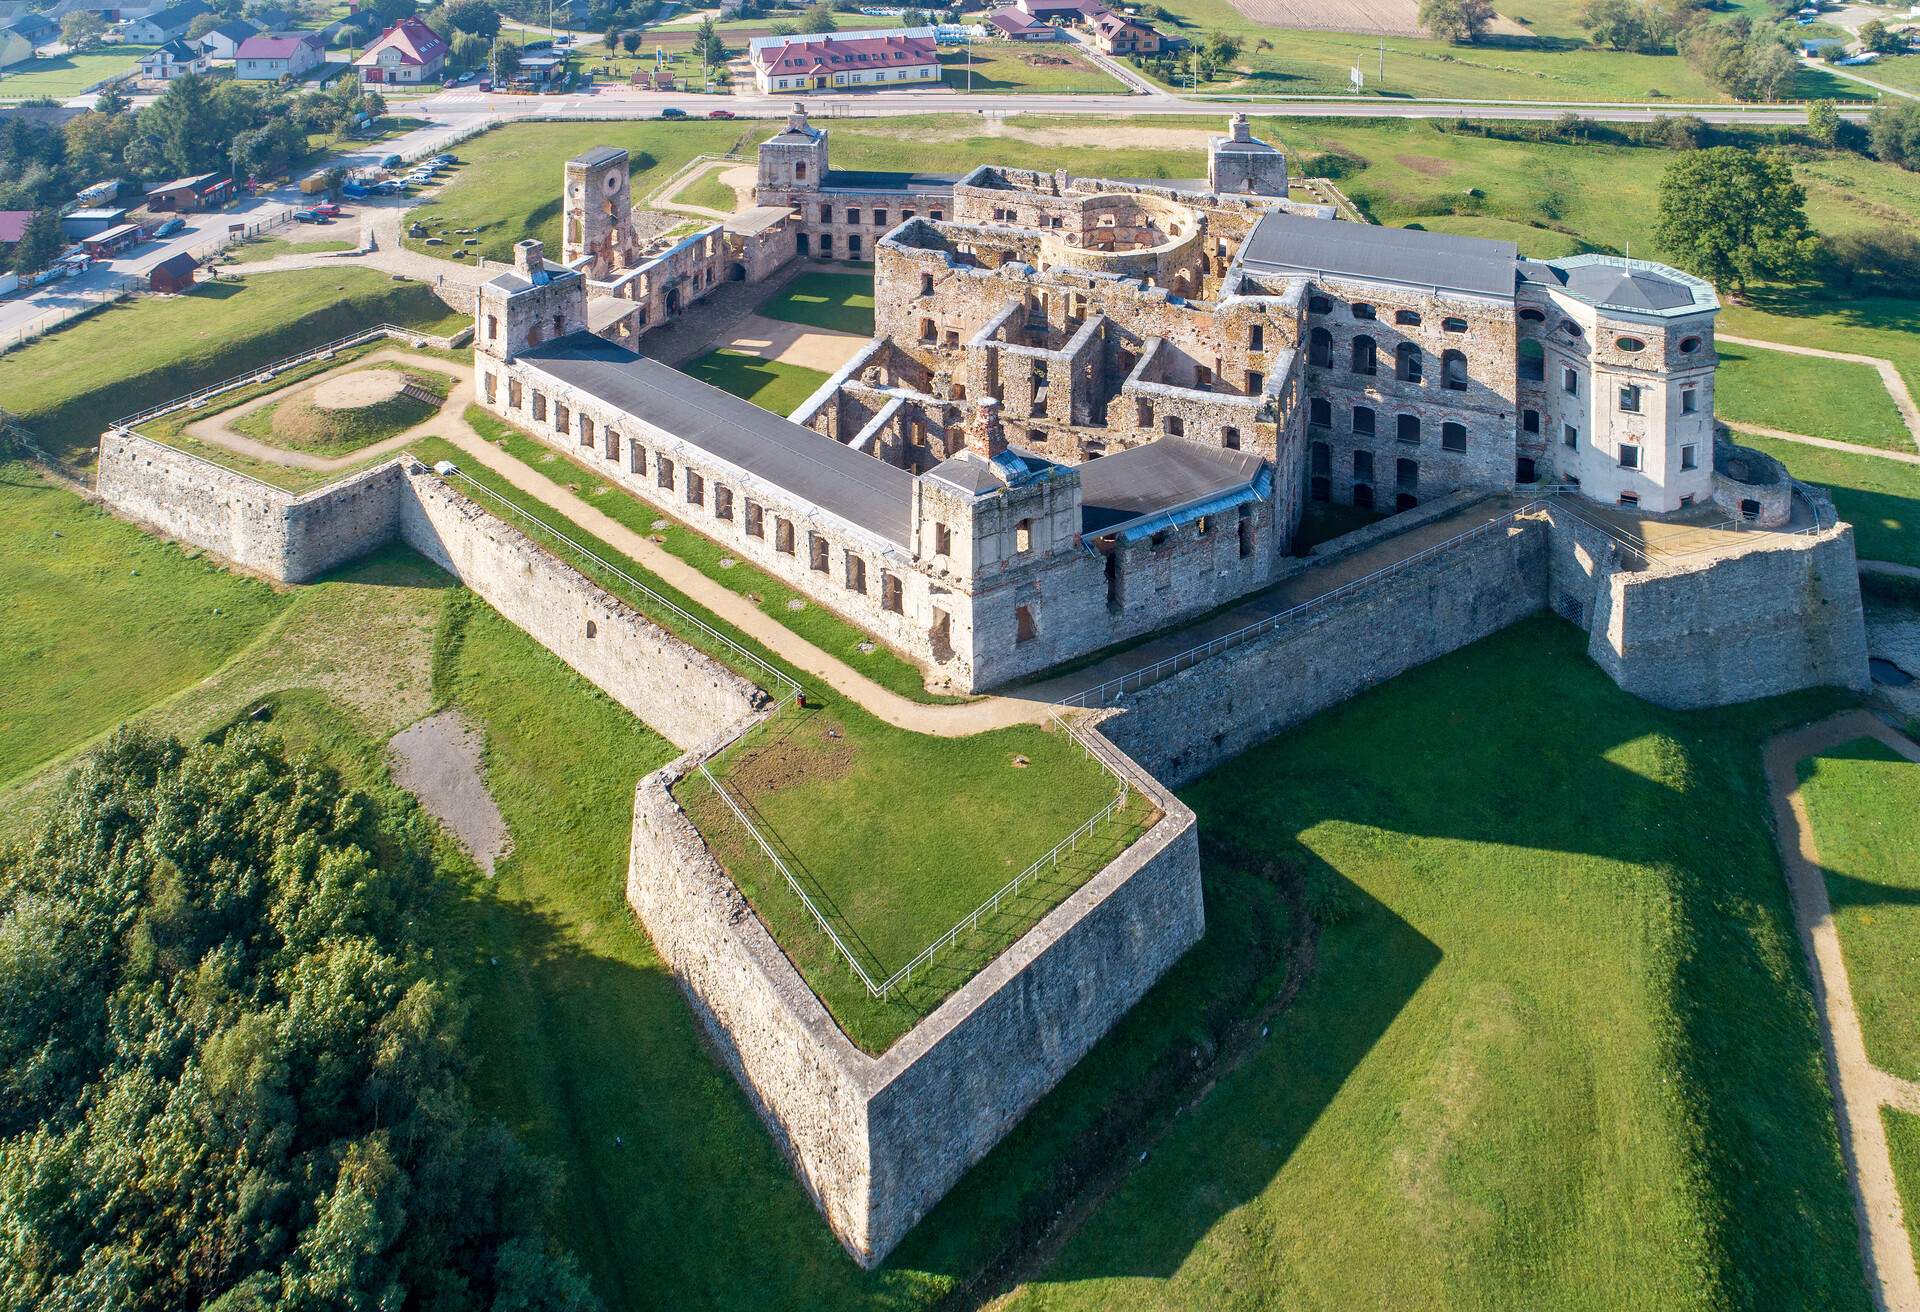 Old, ruined castle Krzyztopor in Ujazd, Poland, built in 17th century, ruined to naked walls in 18th century. Aerial view in the morning; Shutterstock ID 1213566163